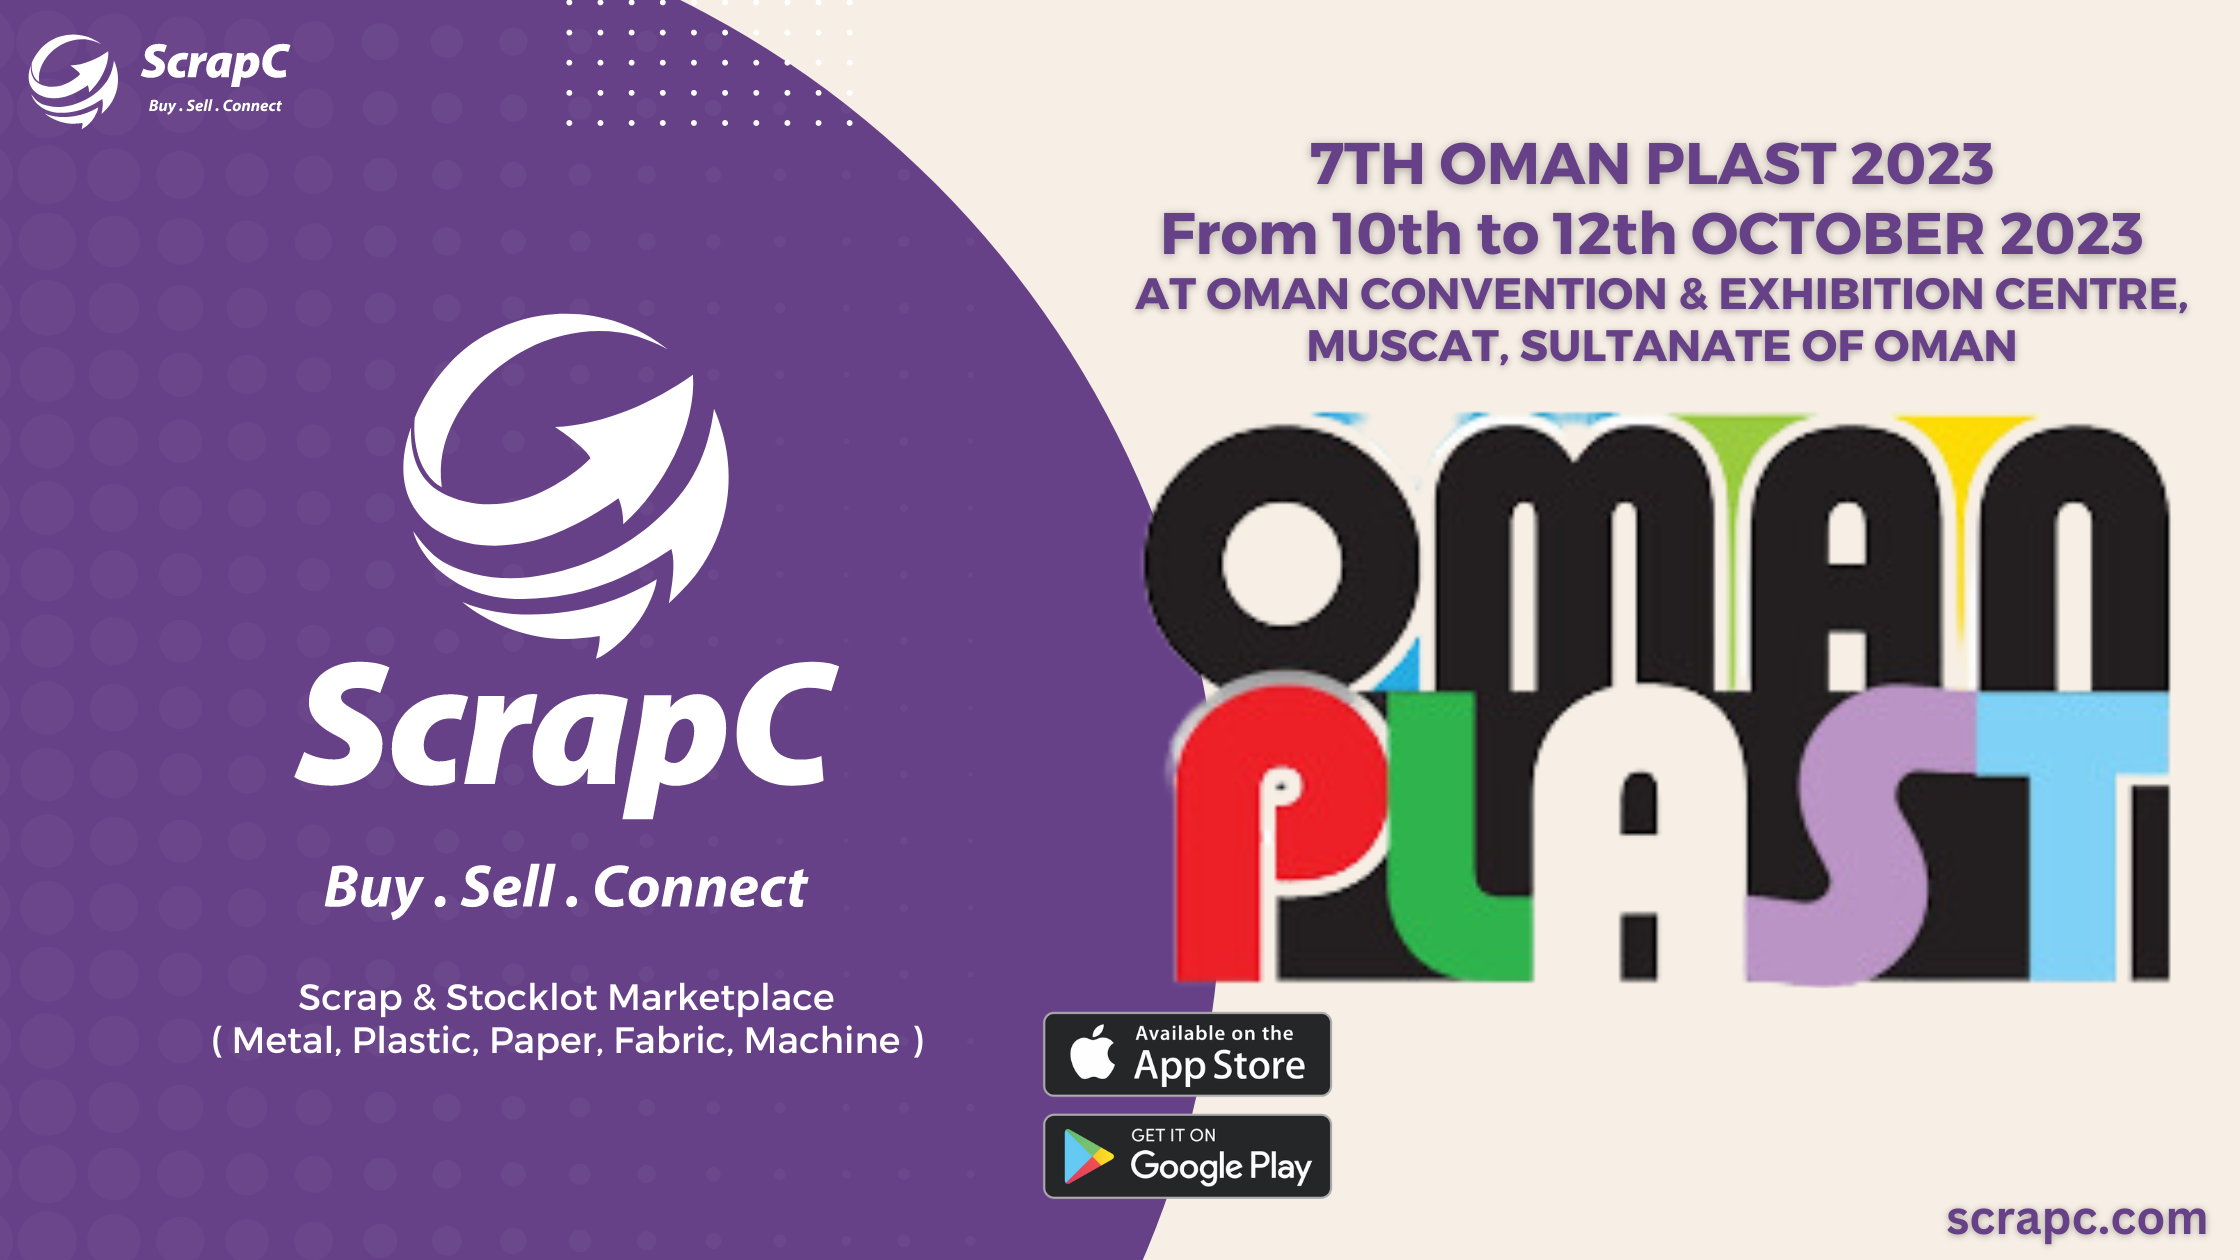 A dynamic showcase of the Oman Plast 2023 exhibition floor featuring the latest in plastics, rubber, petrochemicals, fertilizers, recycling, printing, and packaging innovations.